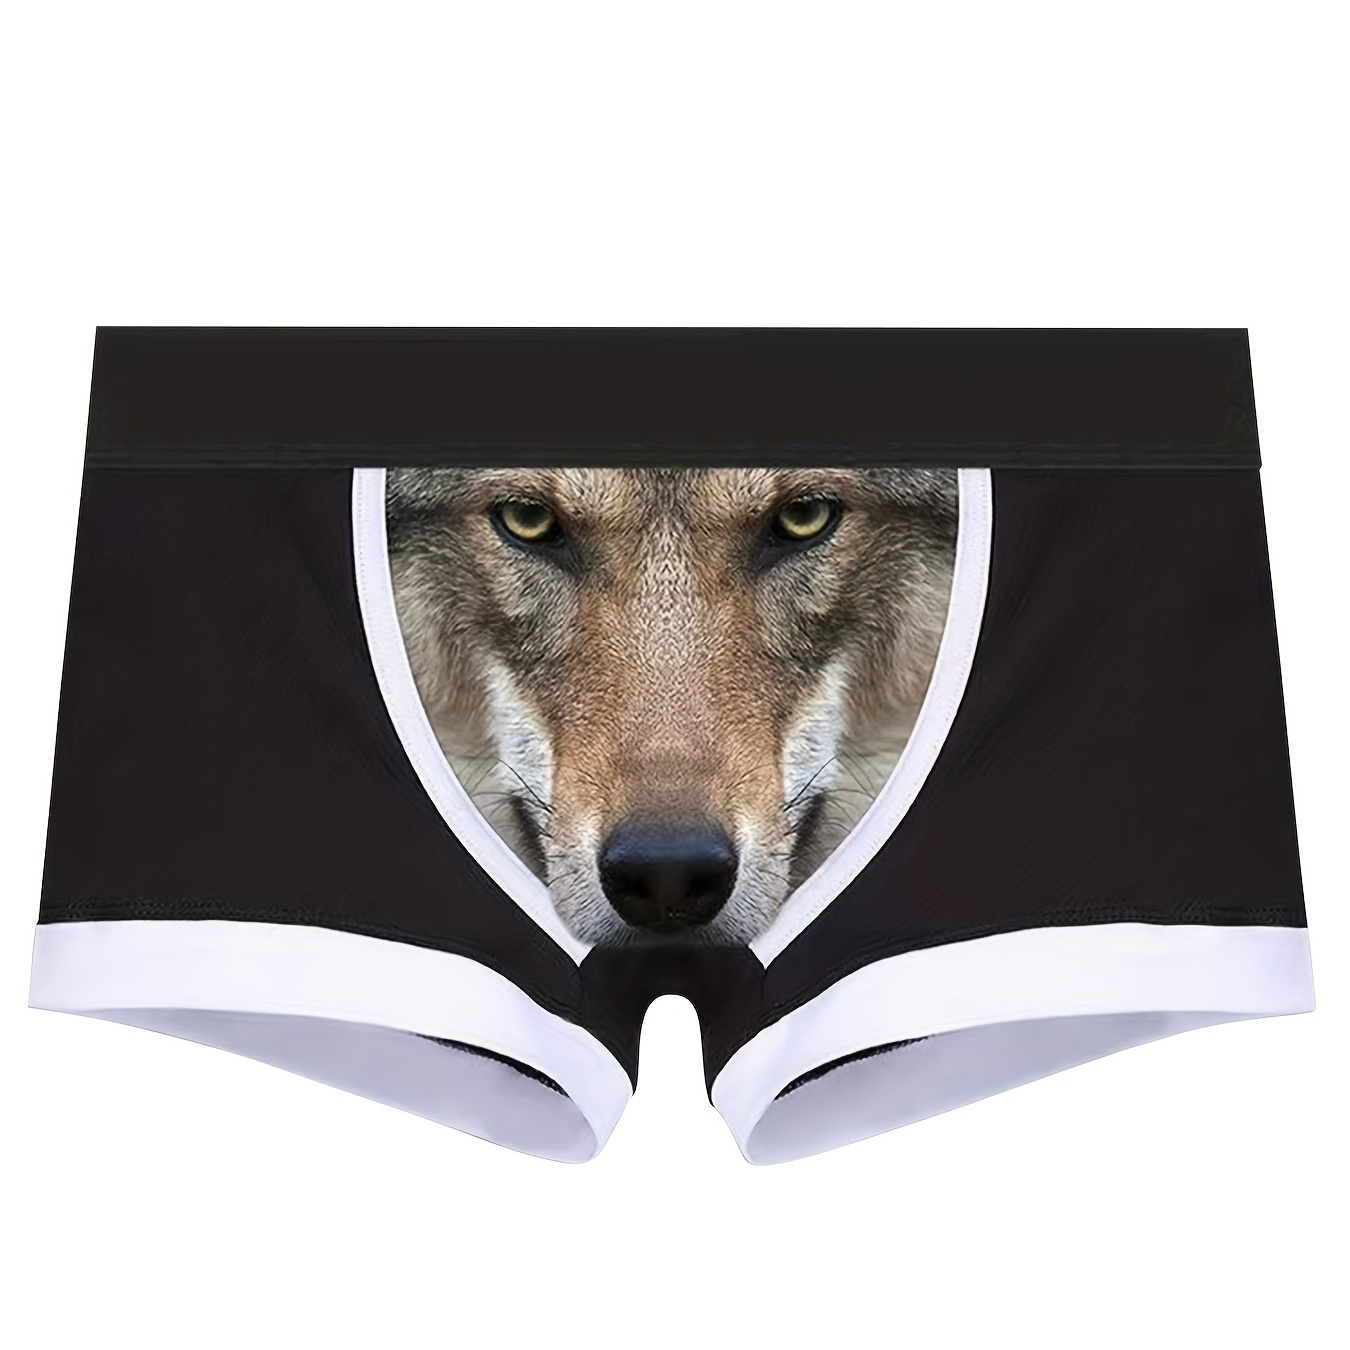 

1pc Men's Underwear Funny 3d Animal Printed Boxers Novelty Humorous Boxer Shorts Underwear Novelty Shorts For Men Daily Wear